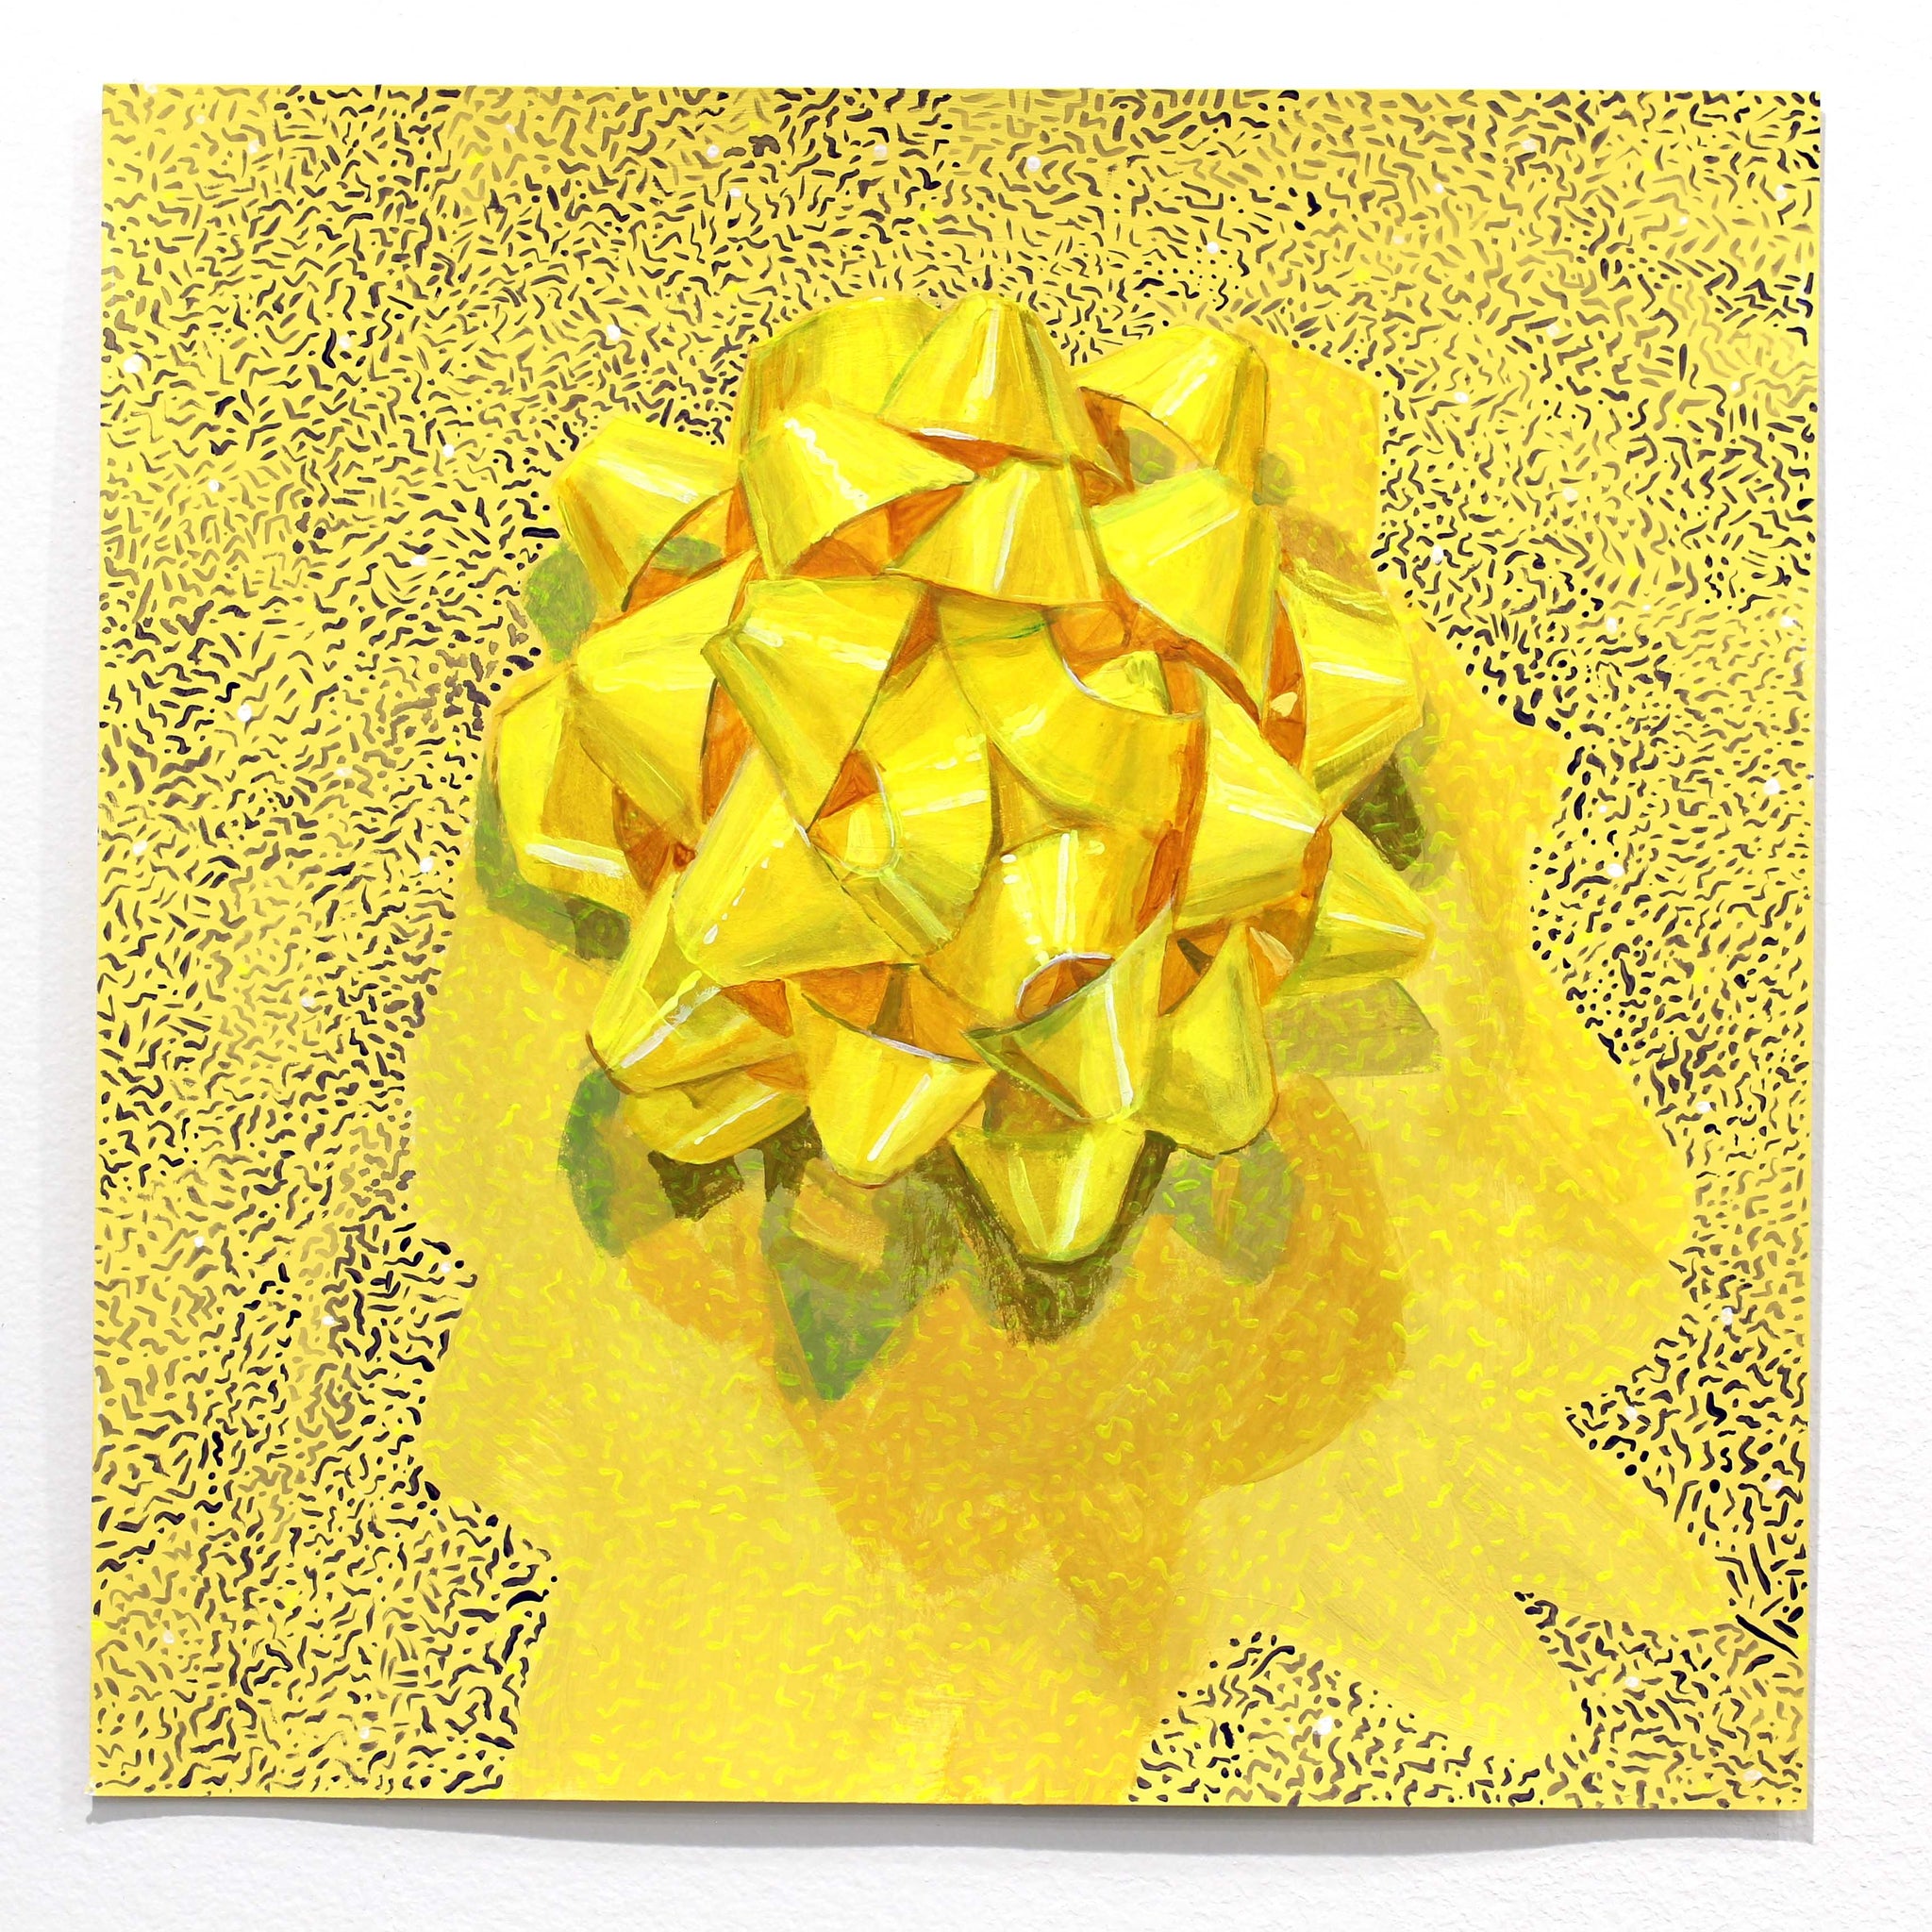 Melodie Provenzano, "Gold Bow on Magnetic Field"